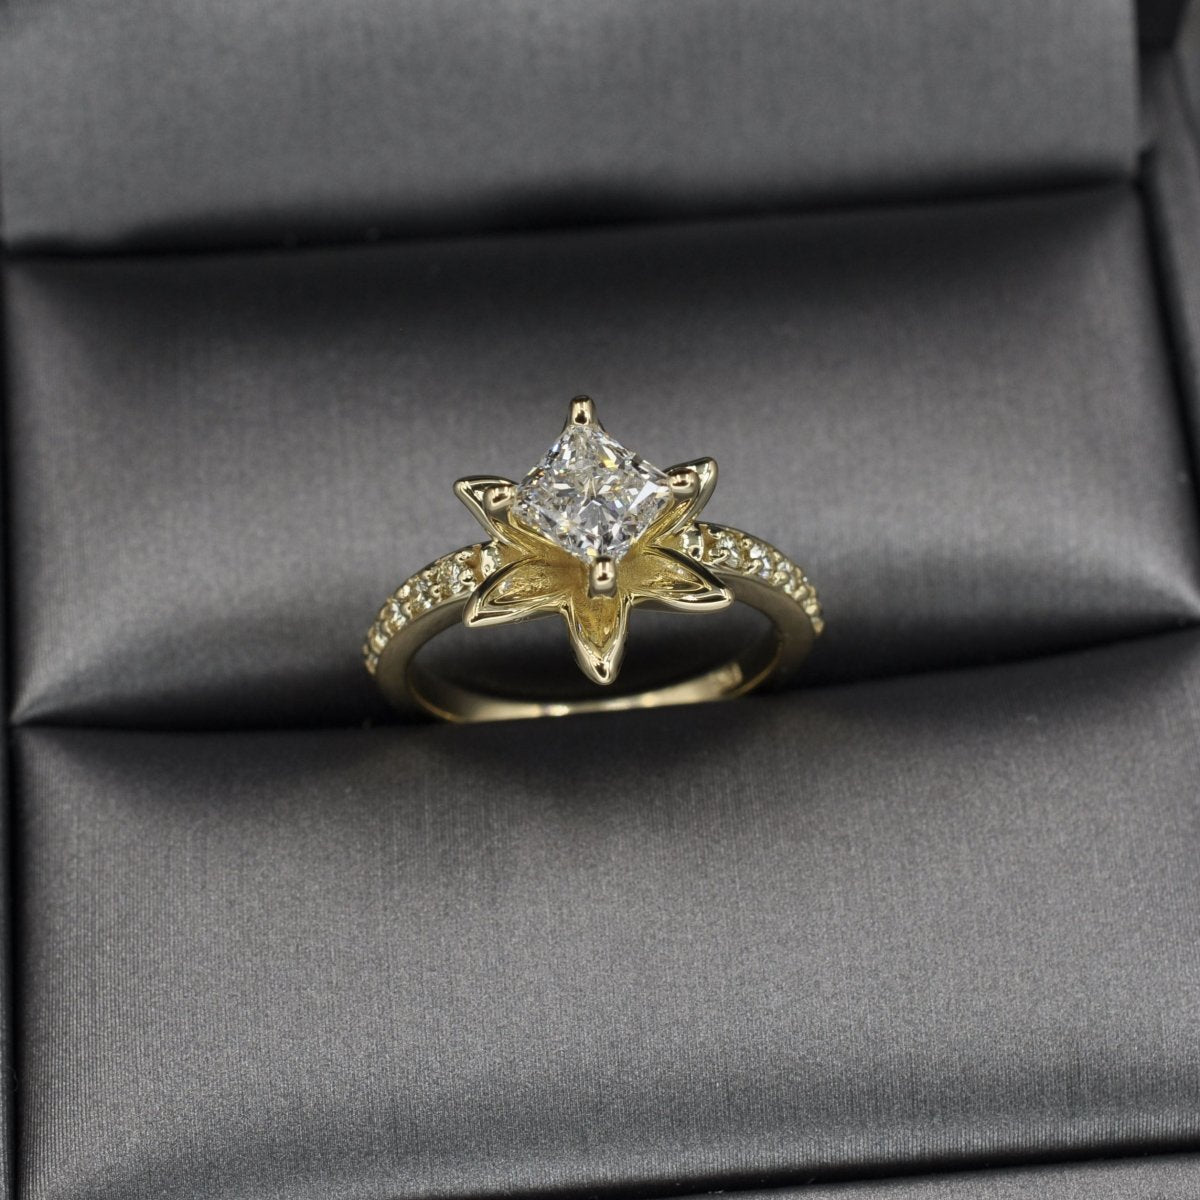 Special 0.80CT Princess and Round Cut Diamond Engagement Ring in 18kt Yellow Gold - Primestyle.com